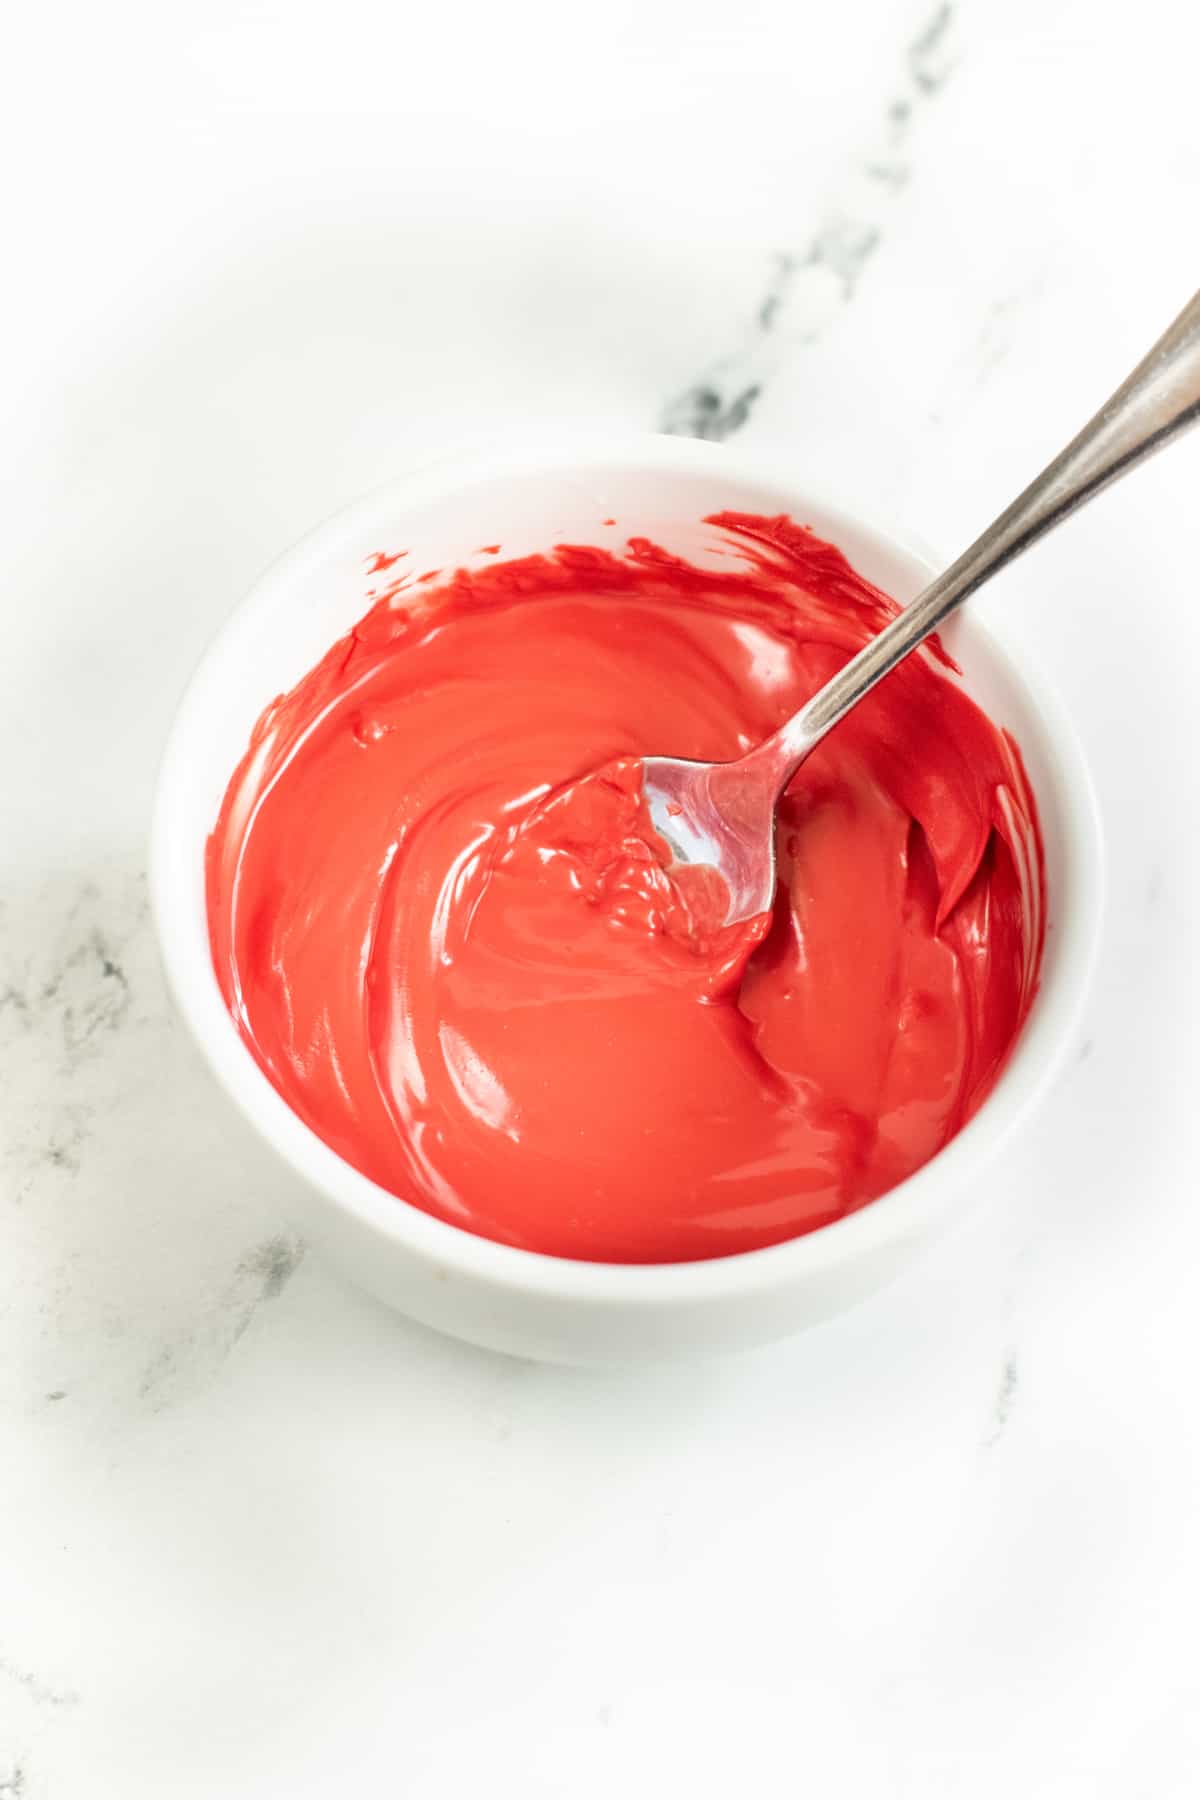 smooth and creamy melted red candy melts